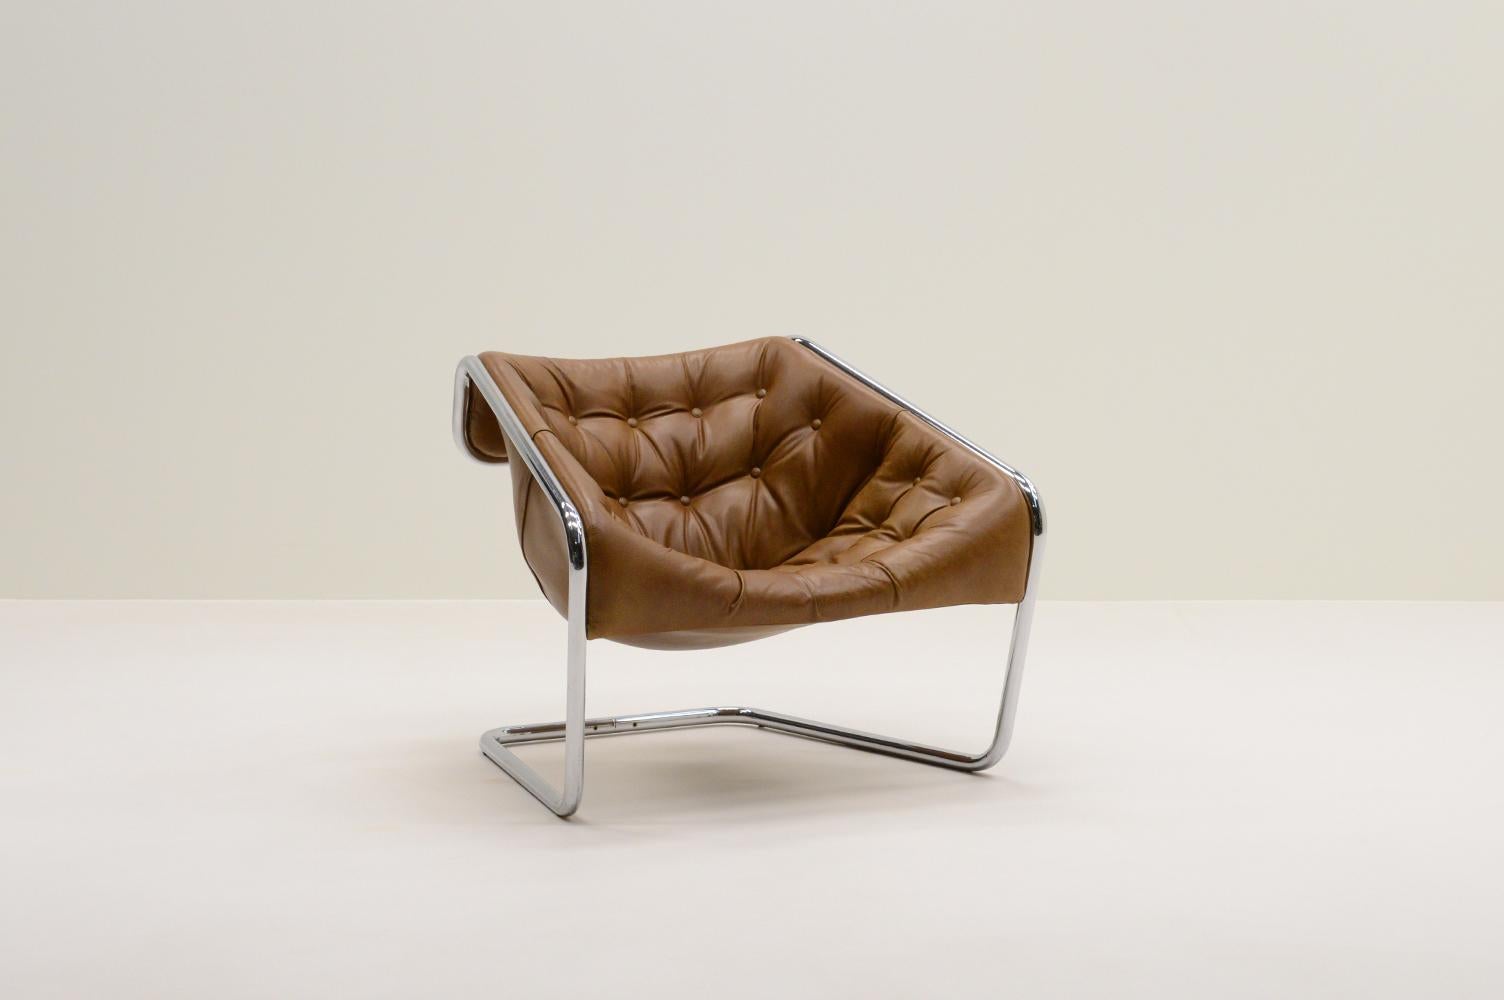 Boxer lounge chair by Kwok Hoï Chan for Steiner, 1970s France. The chrome tubular frame is a trademark of  Kwok Hoi Chan’s designs. The cantilever frame makes it light and comfortable. The chair is reupholstered with old english cognac leather. Some